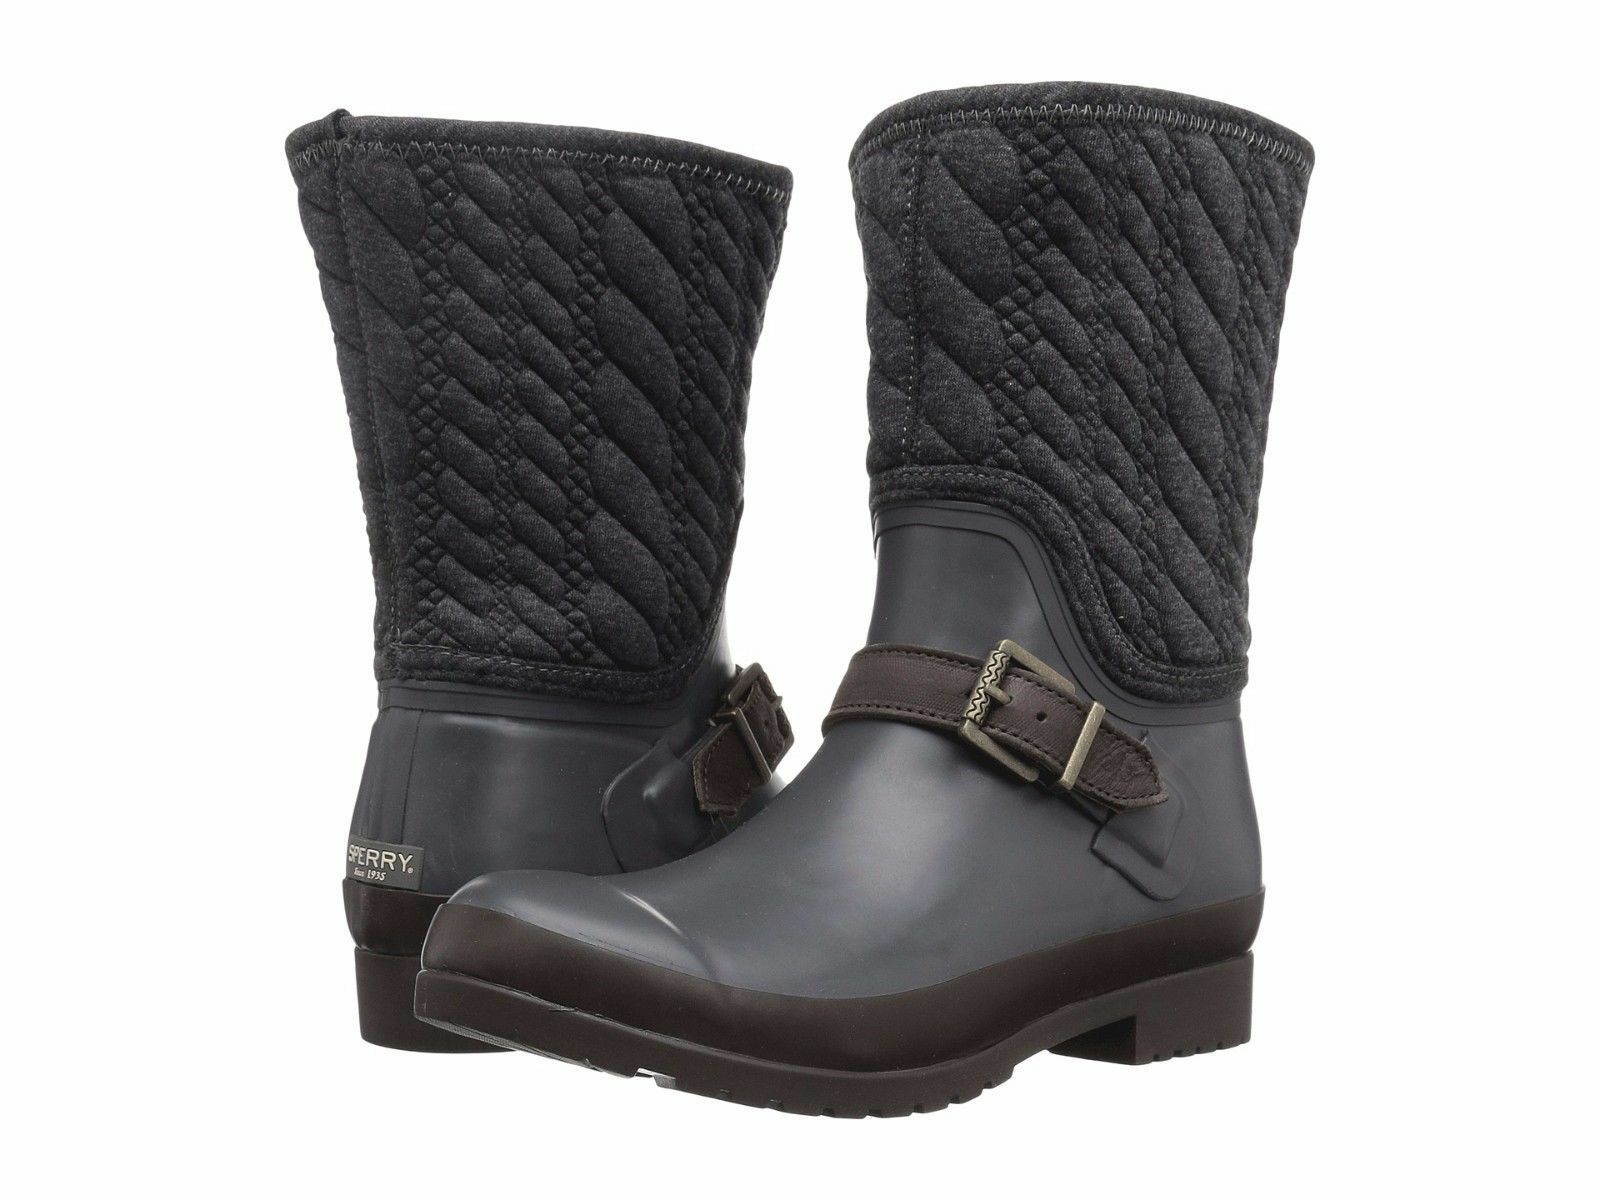 NWB Sperry Top-Sider Walker Gray Grey Rope All Weather Boot Size 6 M - $69.19